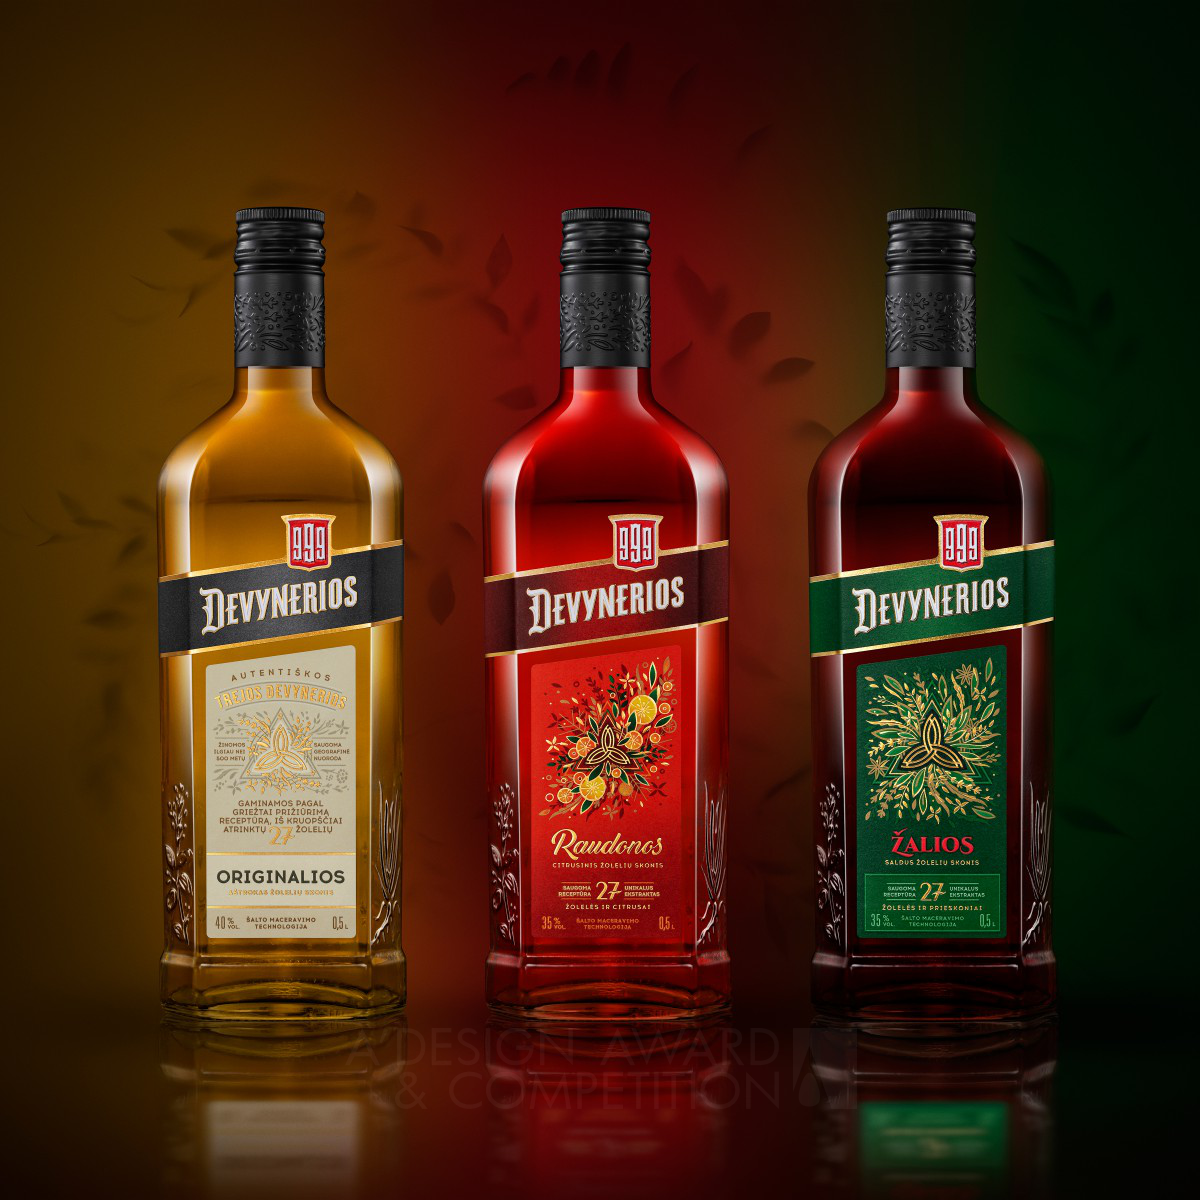 Devynerios Label Designs Reflect Lithuania&#039;s Mysticism and Natural Ingredients